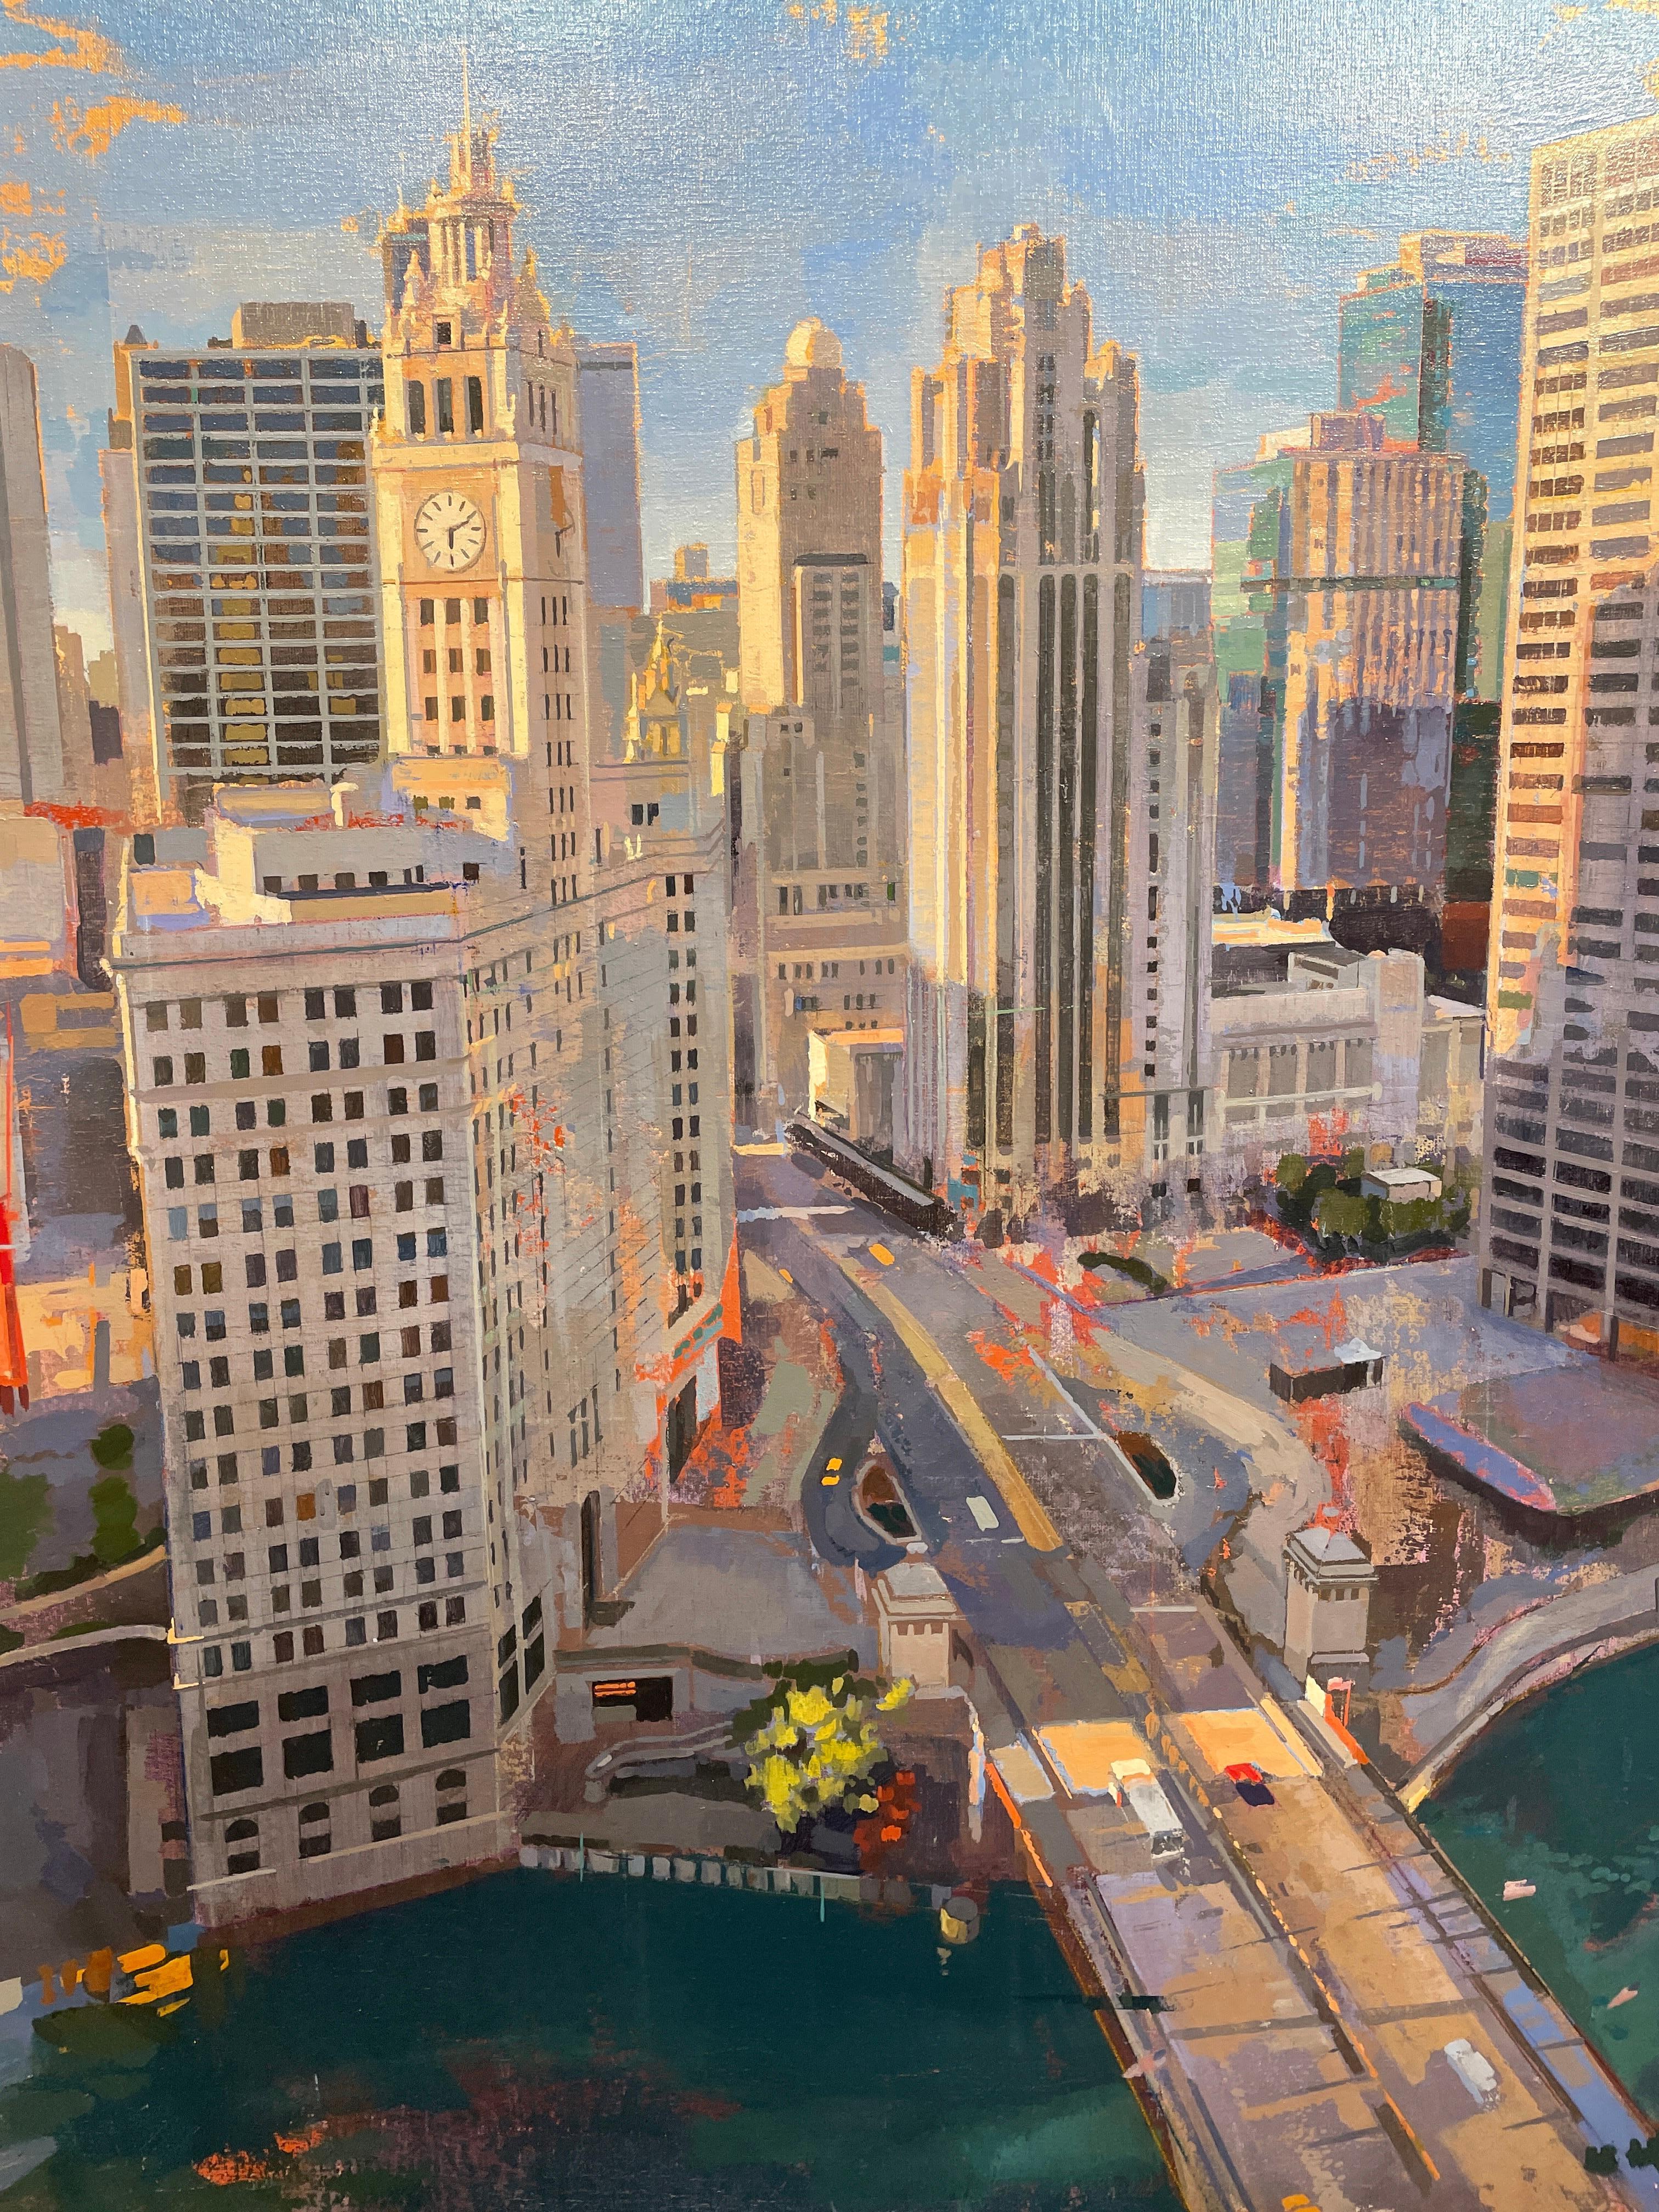 Chicago From London - Birds-Eye View From the London House Hotel, Chicago, IL - Gray Abstract Painting by Albert Vidal Moreno